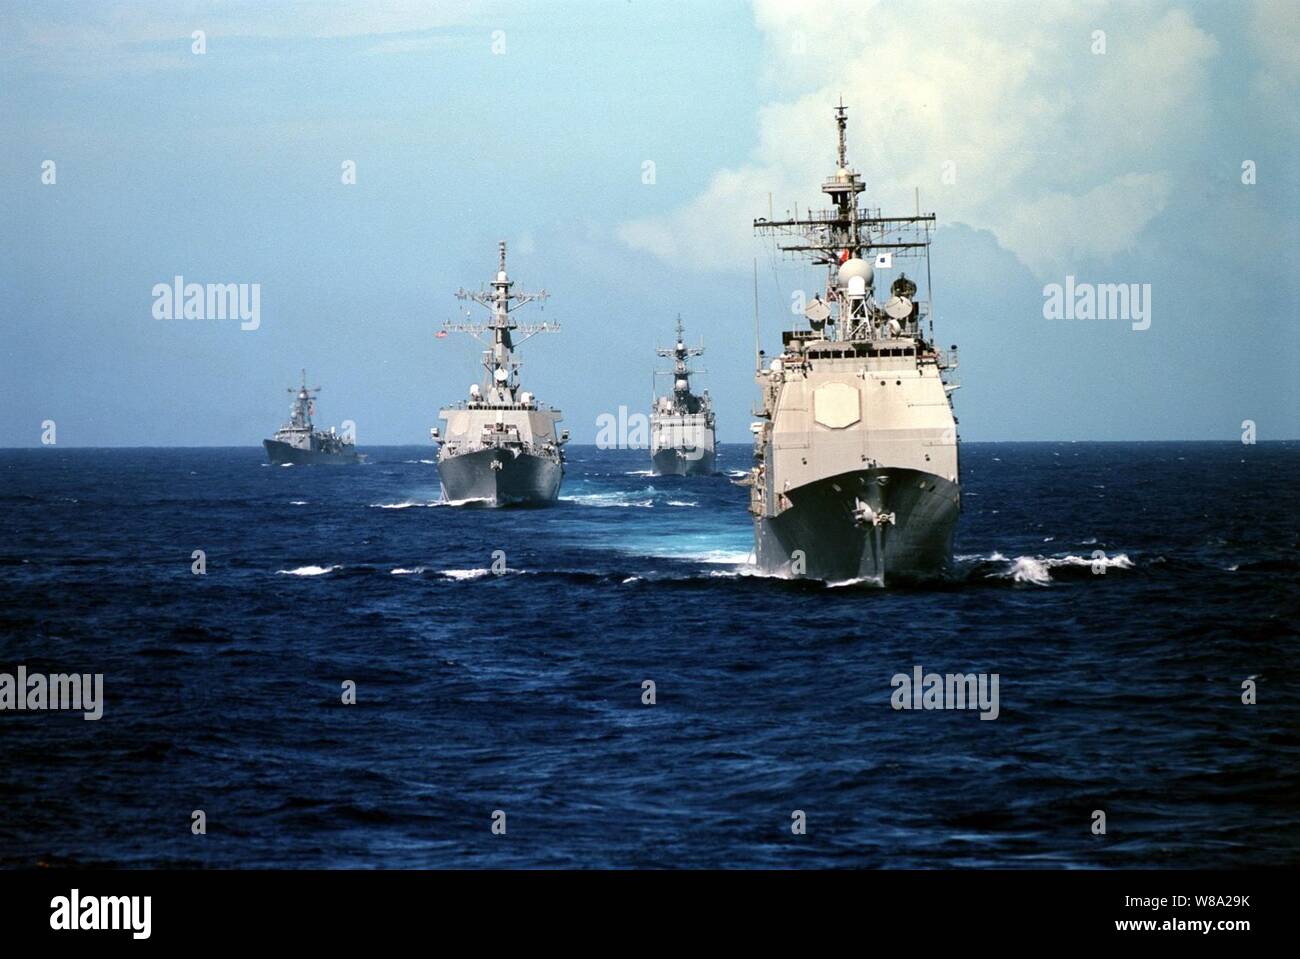 The Ticonderoga Class Guided Missile Cruiser USS Vincennes (CG 49) (right) steams in front of three other classes of U.S. Navy ships as they operate in the Pacific Ocean during a Y2K operational testing exercise on Sept. 18, 1999.  Following the Vincennes from right to left are the Spruance Class Destroyer USS John Cushing (DD 985), Arleigh Burke Class Guided Missile Destroyer USS John S. McCain (DDG 56), and the Oliver Hazard Perry class Guided Missile Frigate USS Gary (FFG 51). Stock Photo